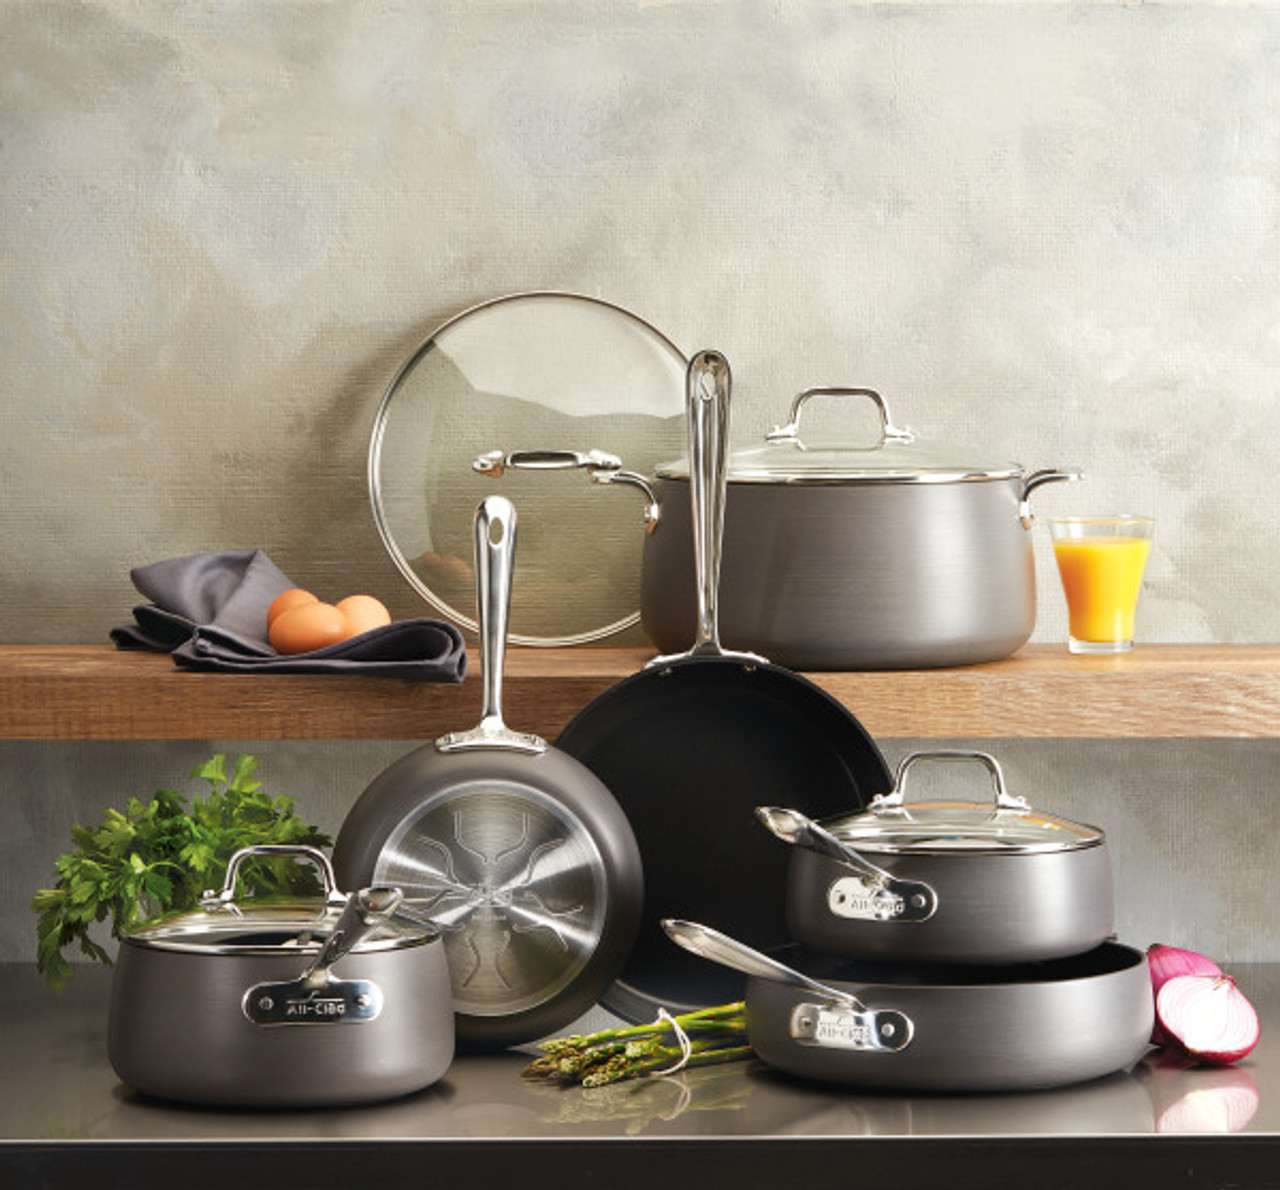 https://cdn11.bigcommerce.com/s-hccytny0od/images/stencil/1280x1280/products/518/1980/all-clad-ha1-10-piece-cookware-set-2__81281.1595949308.jpg?c=2?imbypass=on